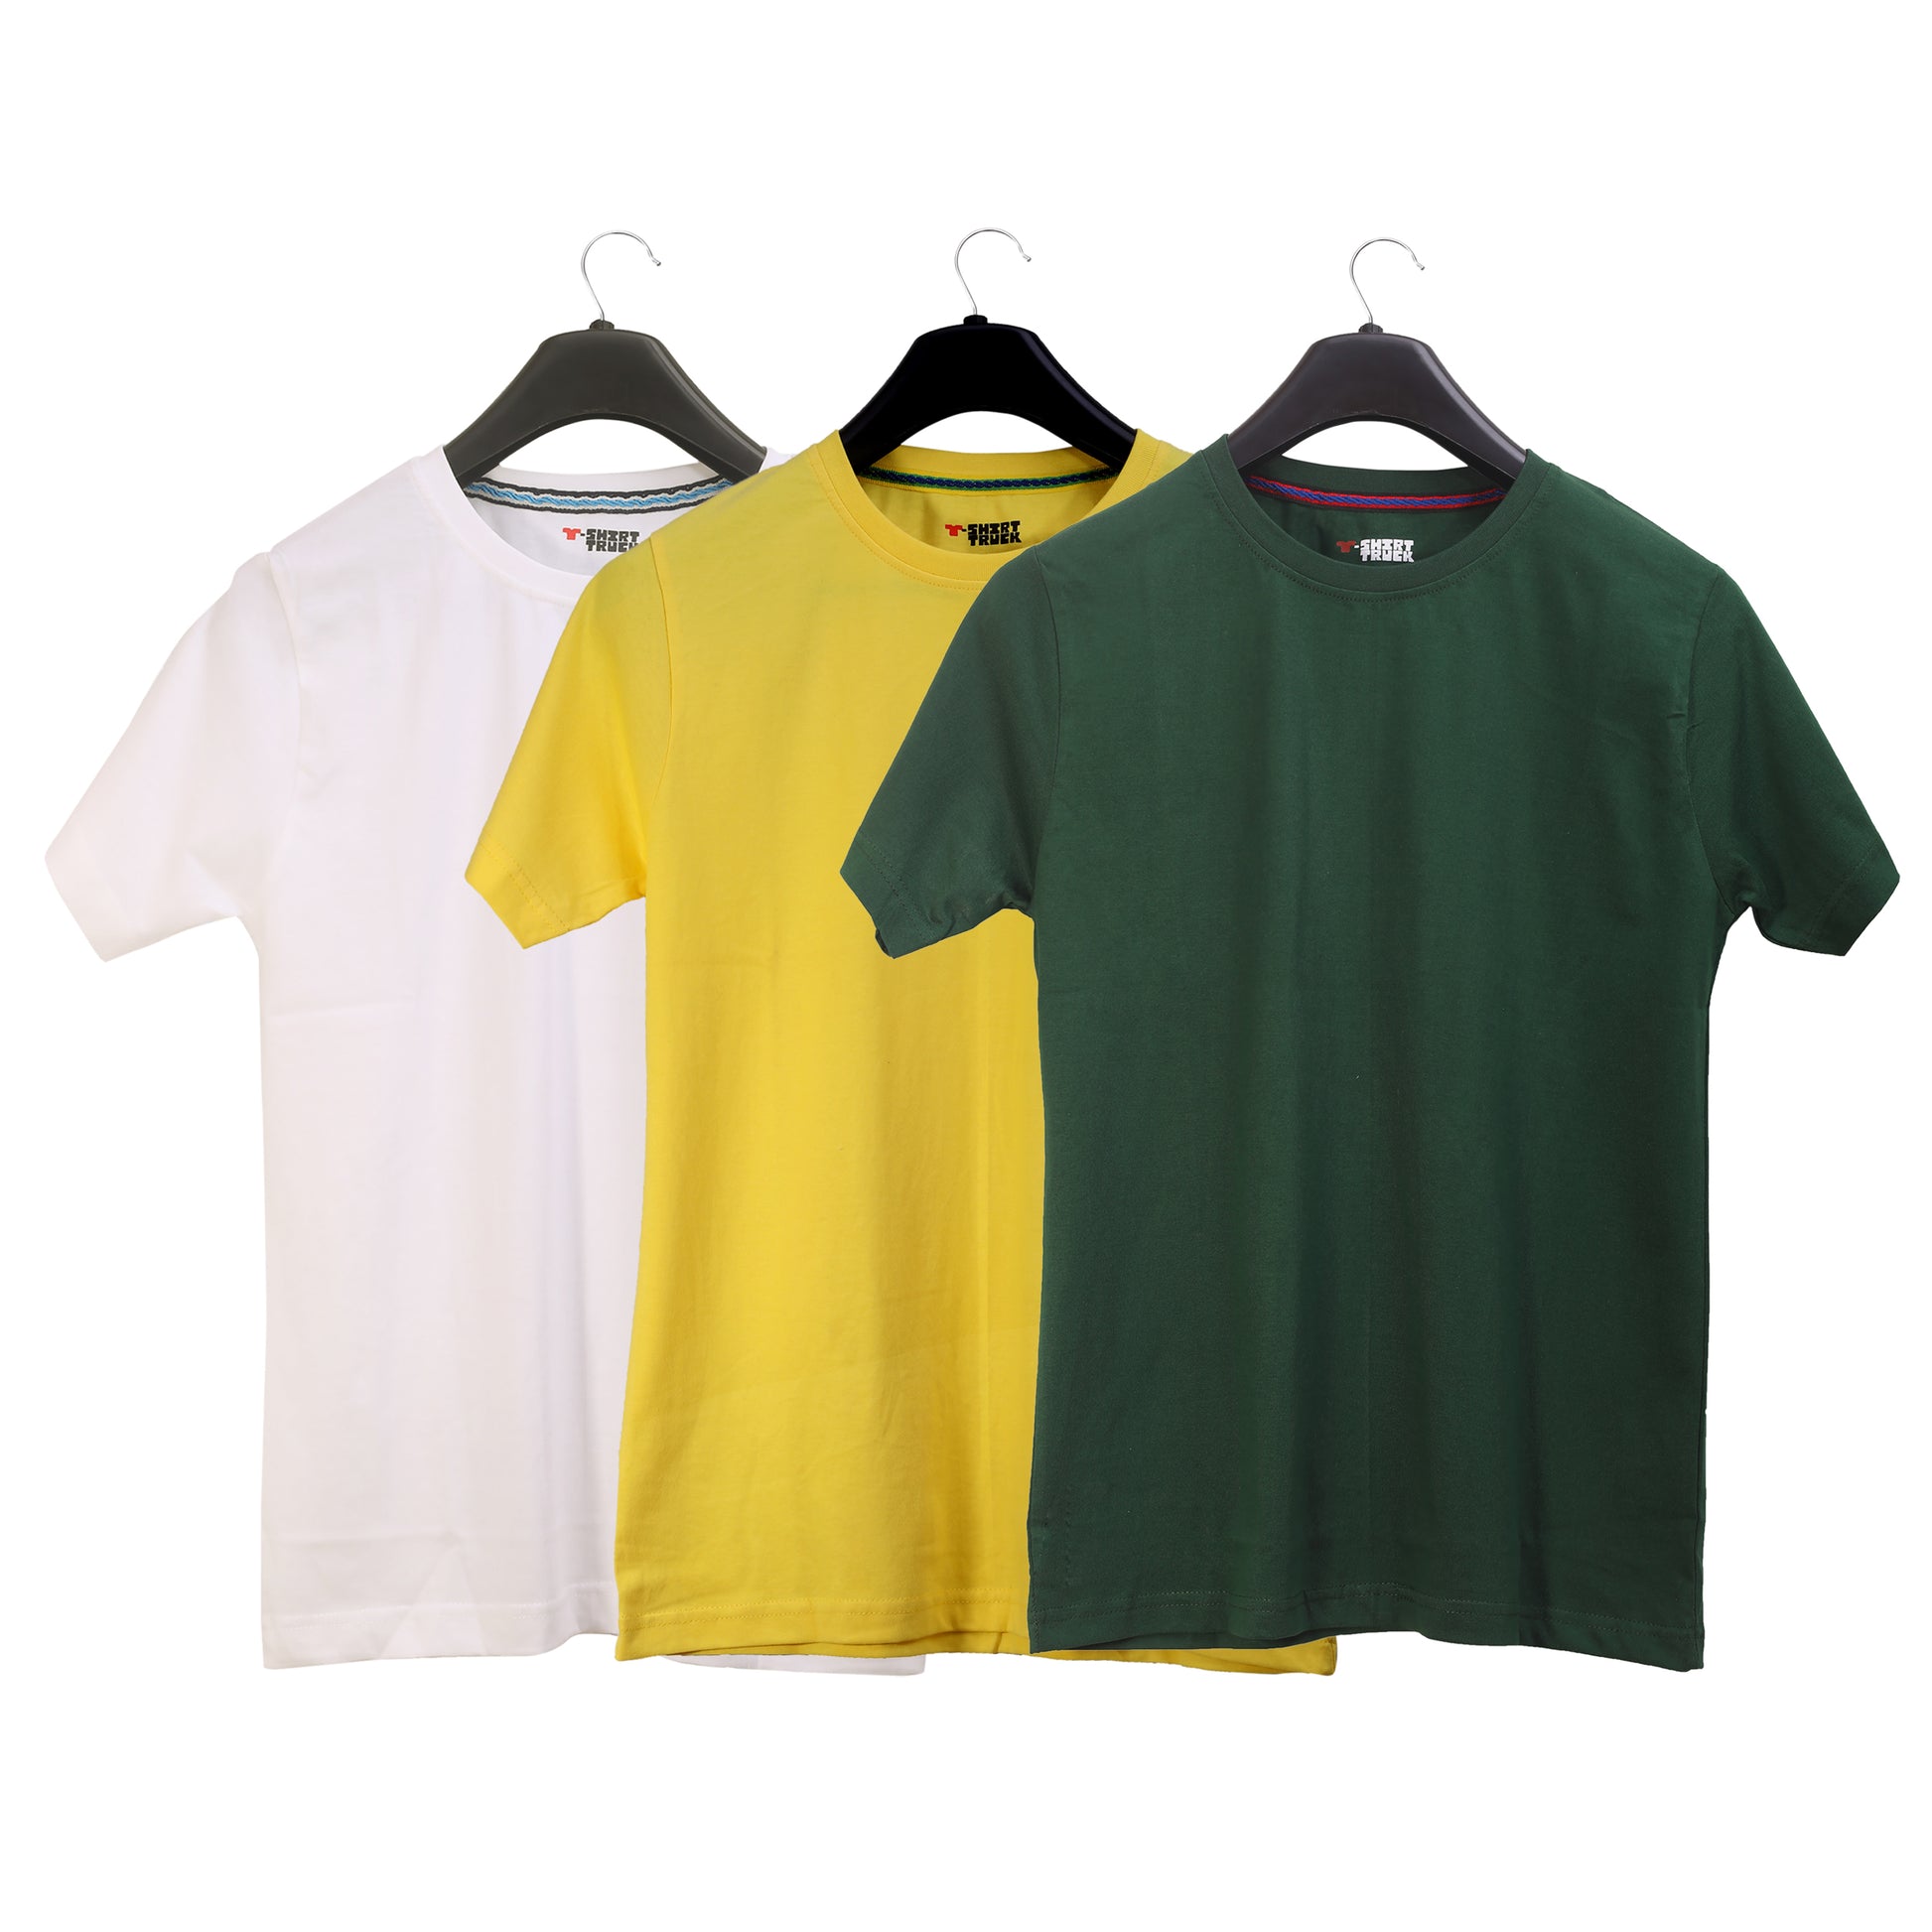 Unisex Round Neck Plain Solid Combo Pack of 3 T-shirts White, Yellow & Green